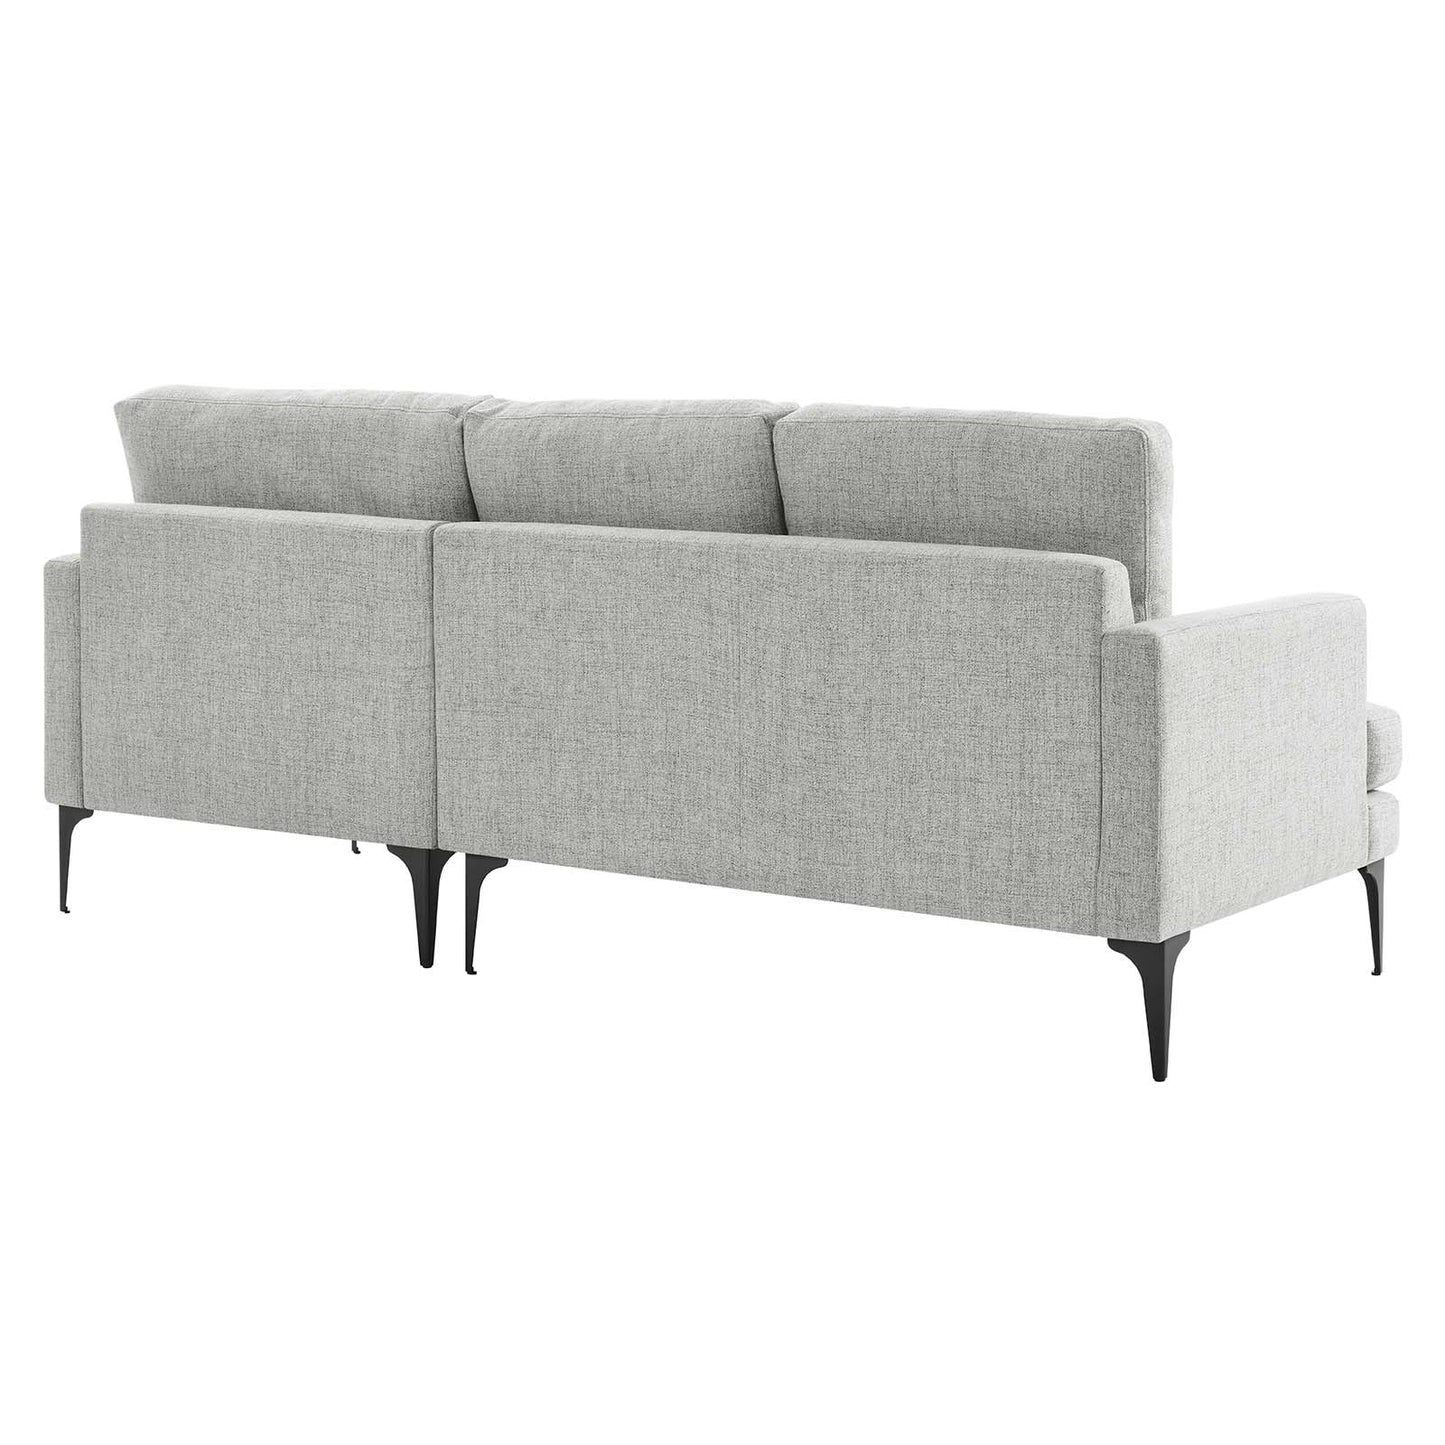 Evermore Right-Facing Upholstered Fabric Sectional Sofa Light Gray EEI-6012-LGR